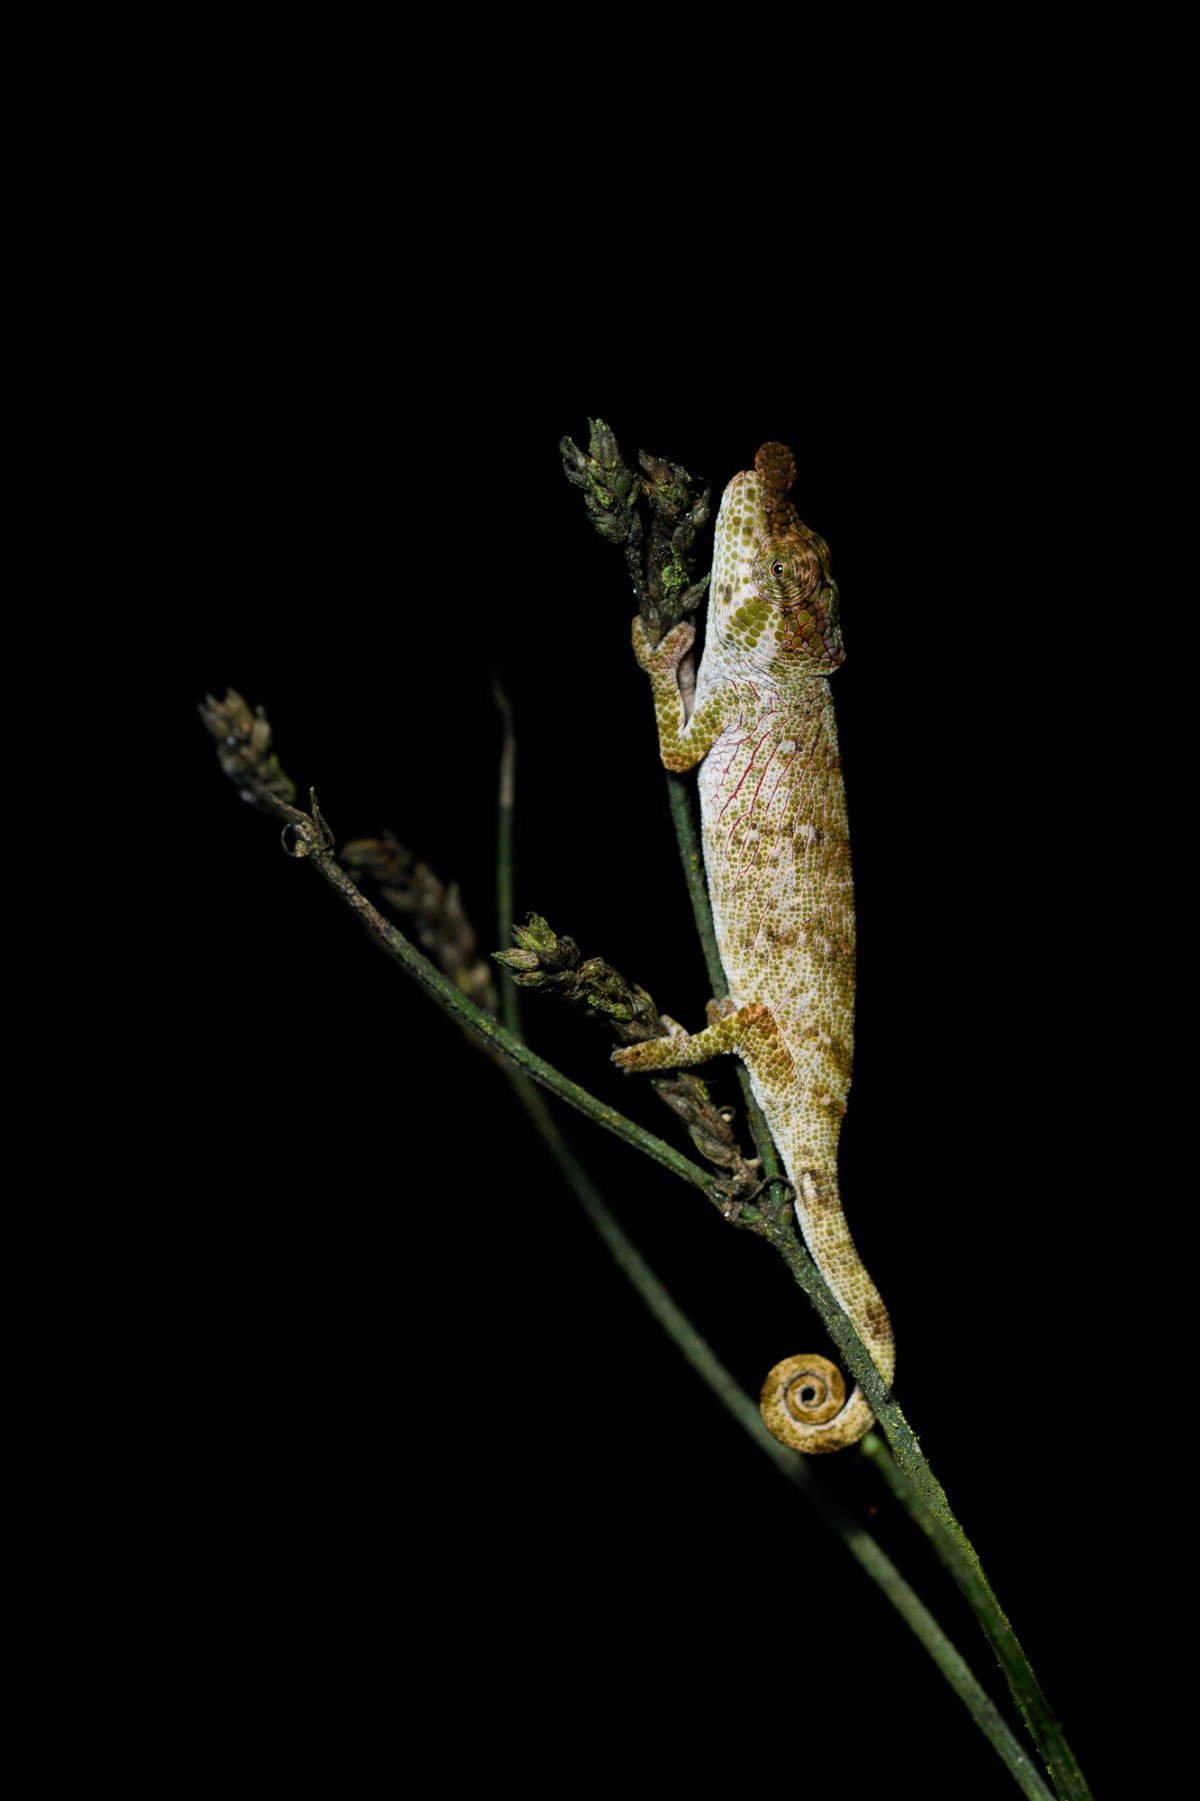 Chameleon resting in a plant during the night - Ranomafana, Madagascar